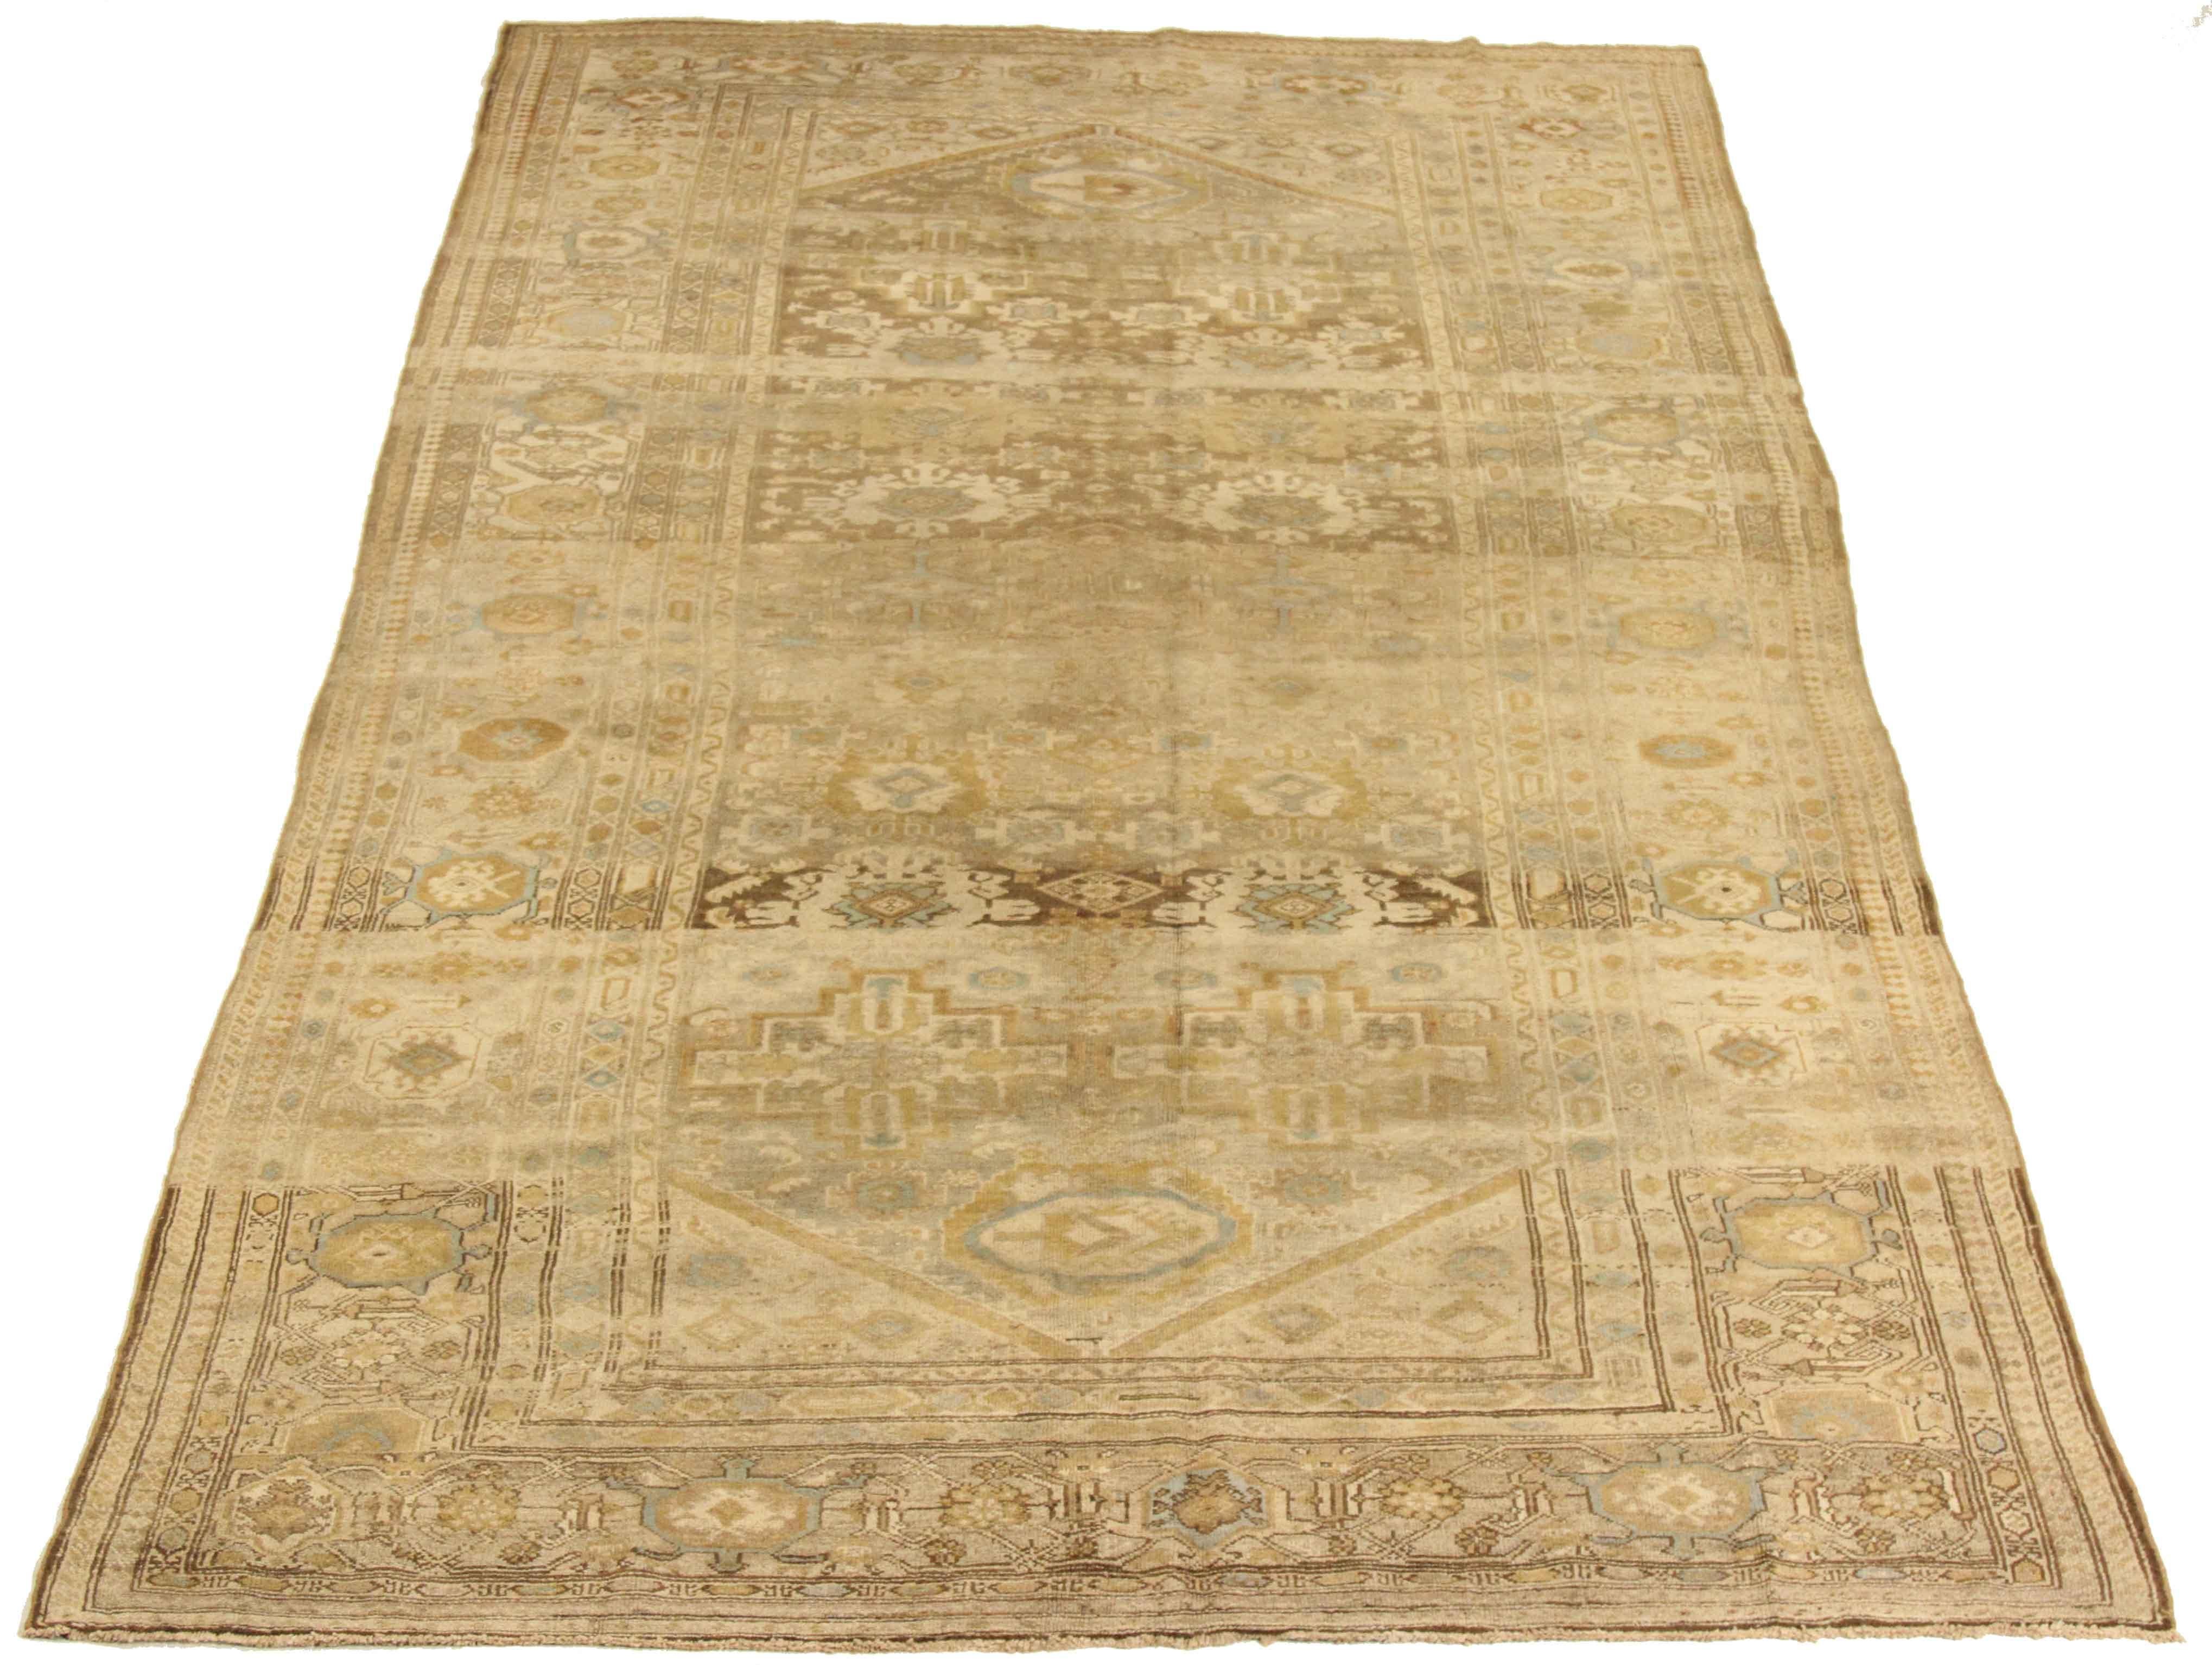 Hand-Knotted Persian Rug Malayer Design with Fading Rustic Floral Patterns, circa 1940 For Sale